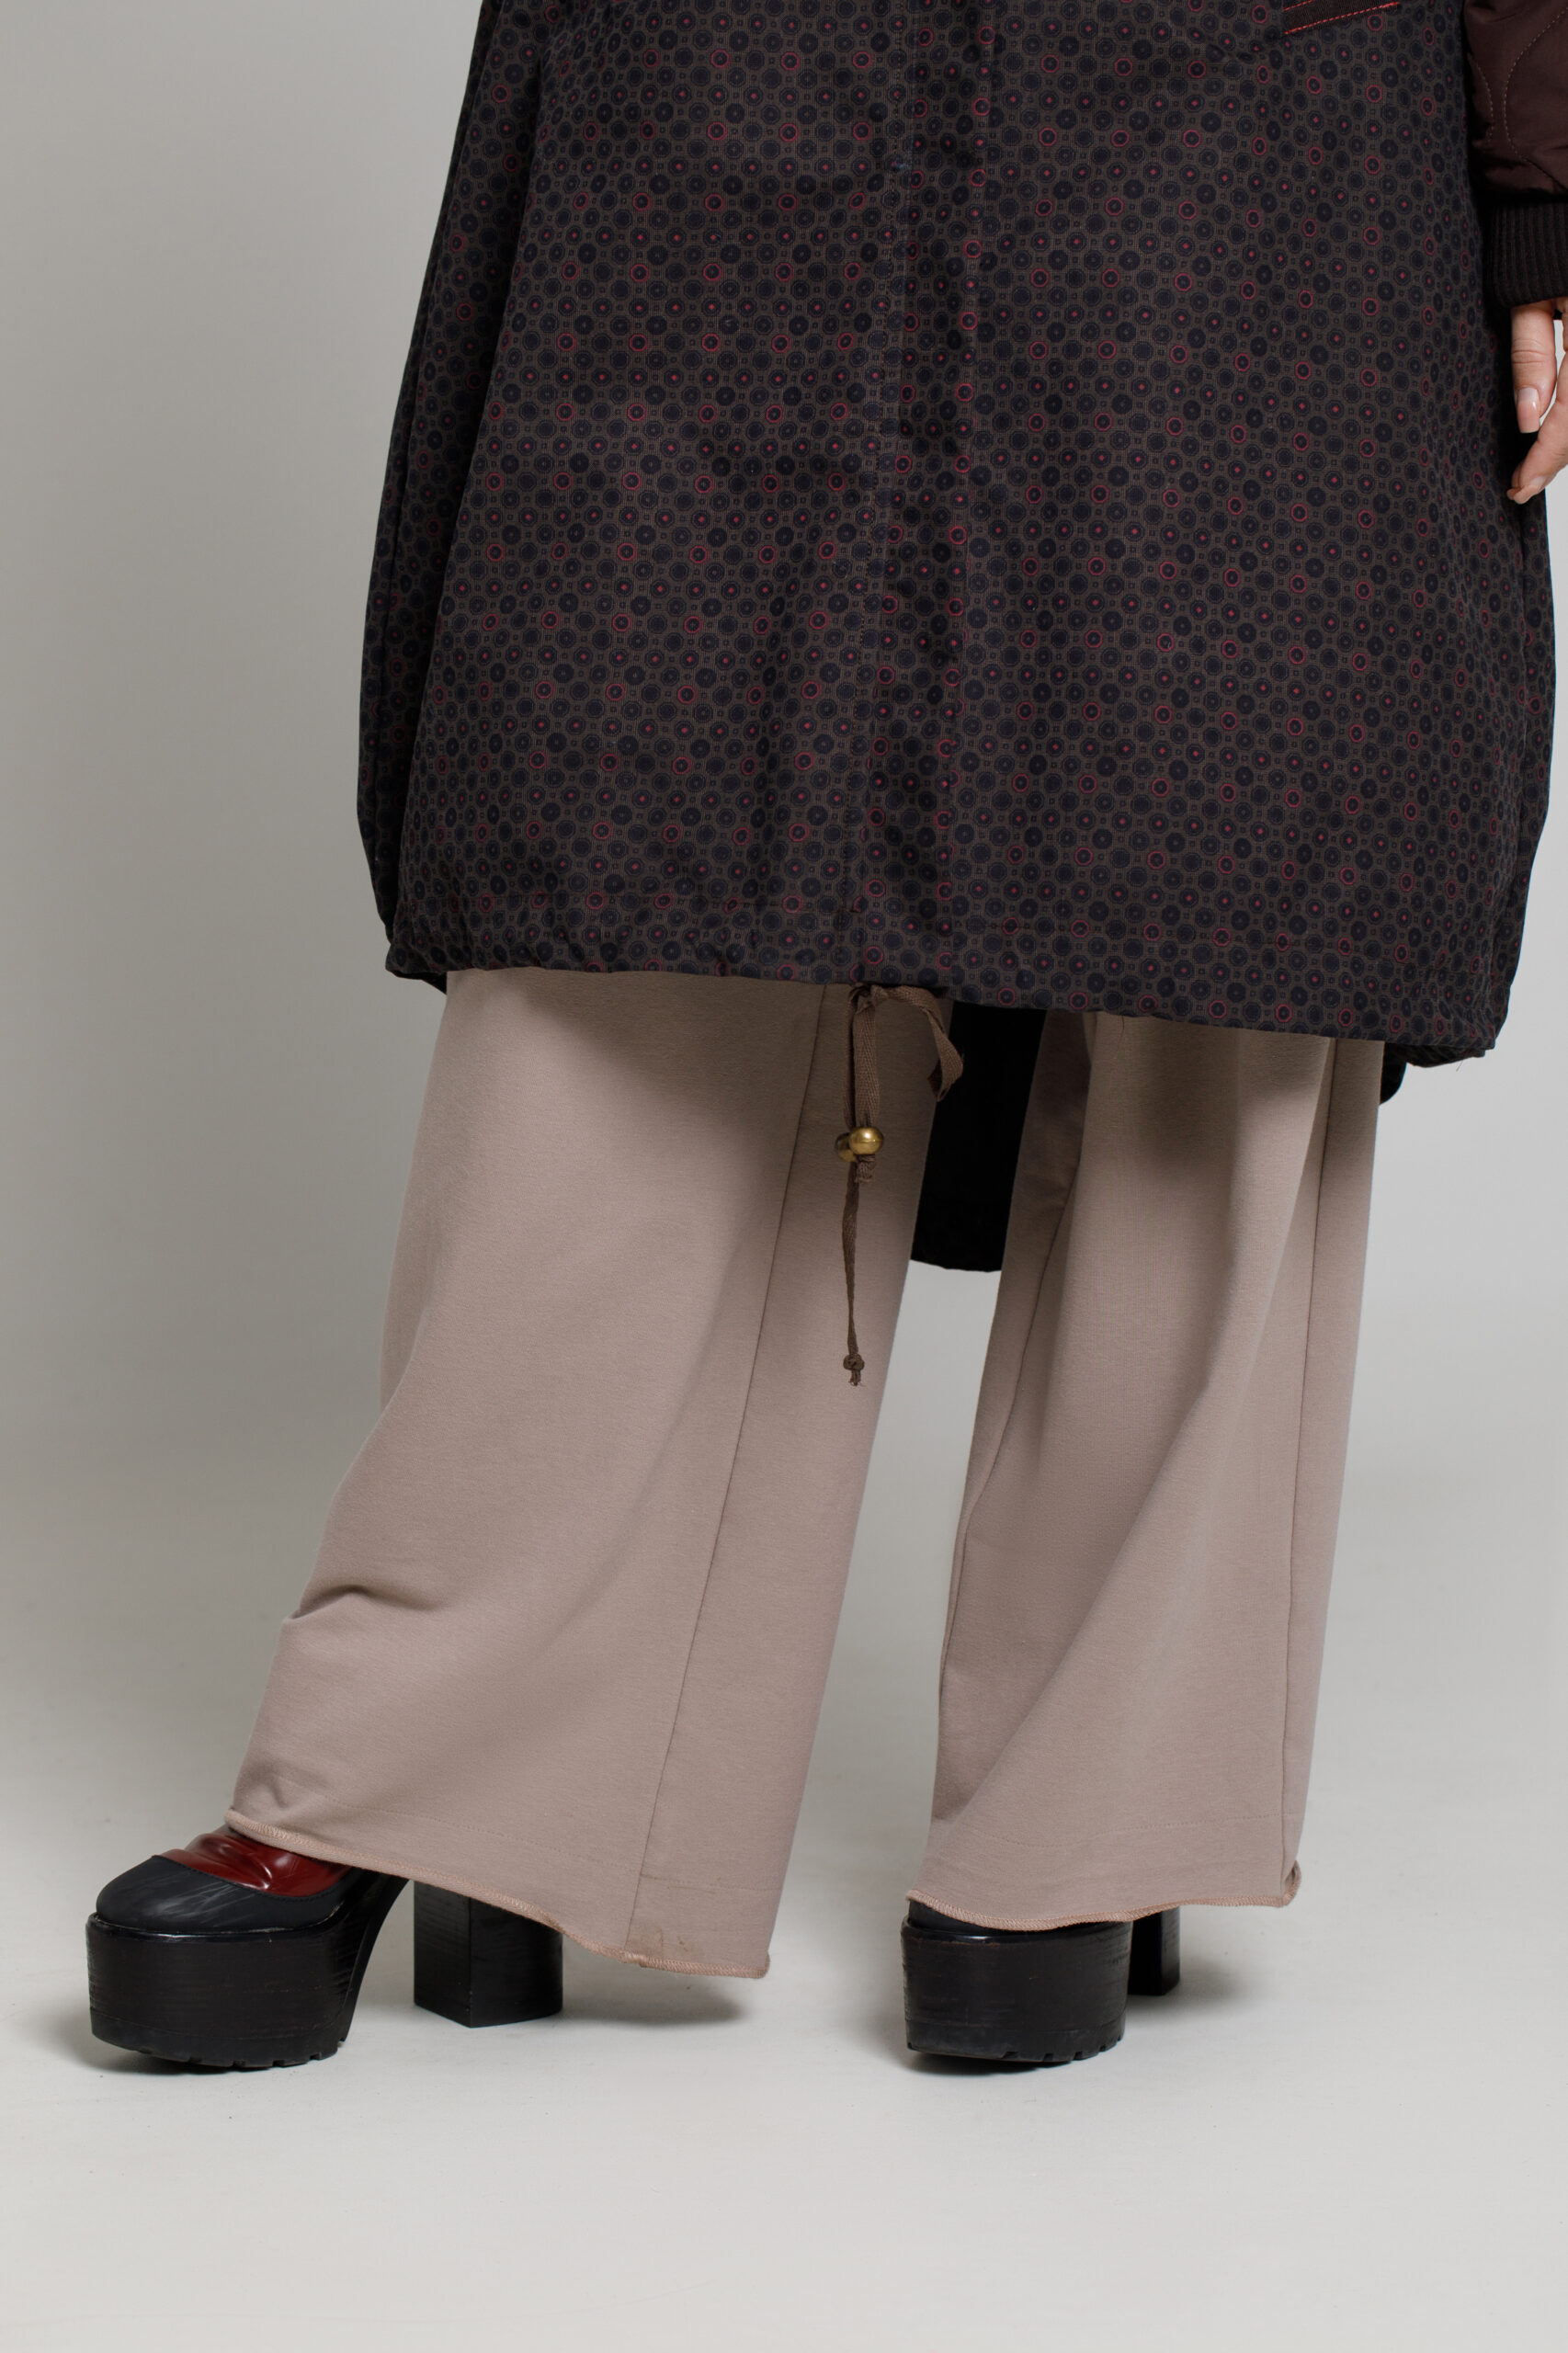 ZURY tercot overcoat with geometric and quilted print. Natural fabrics, original design, handmade embroidery